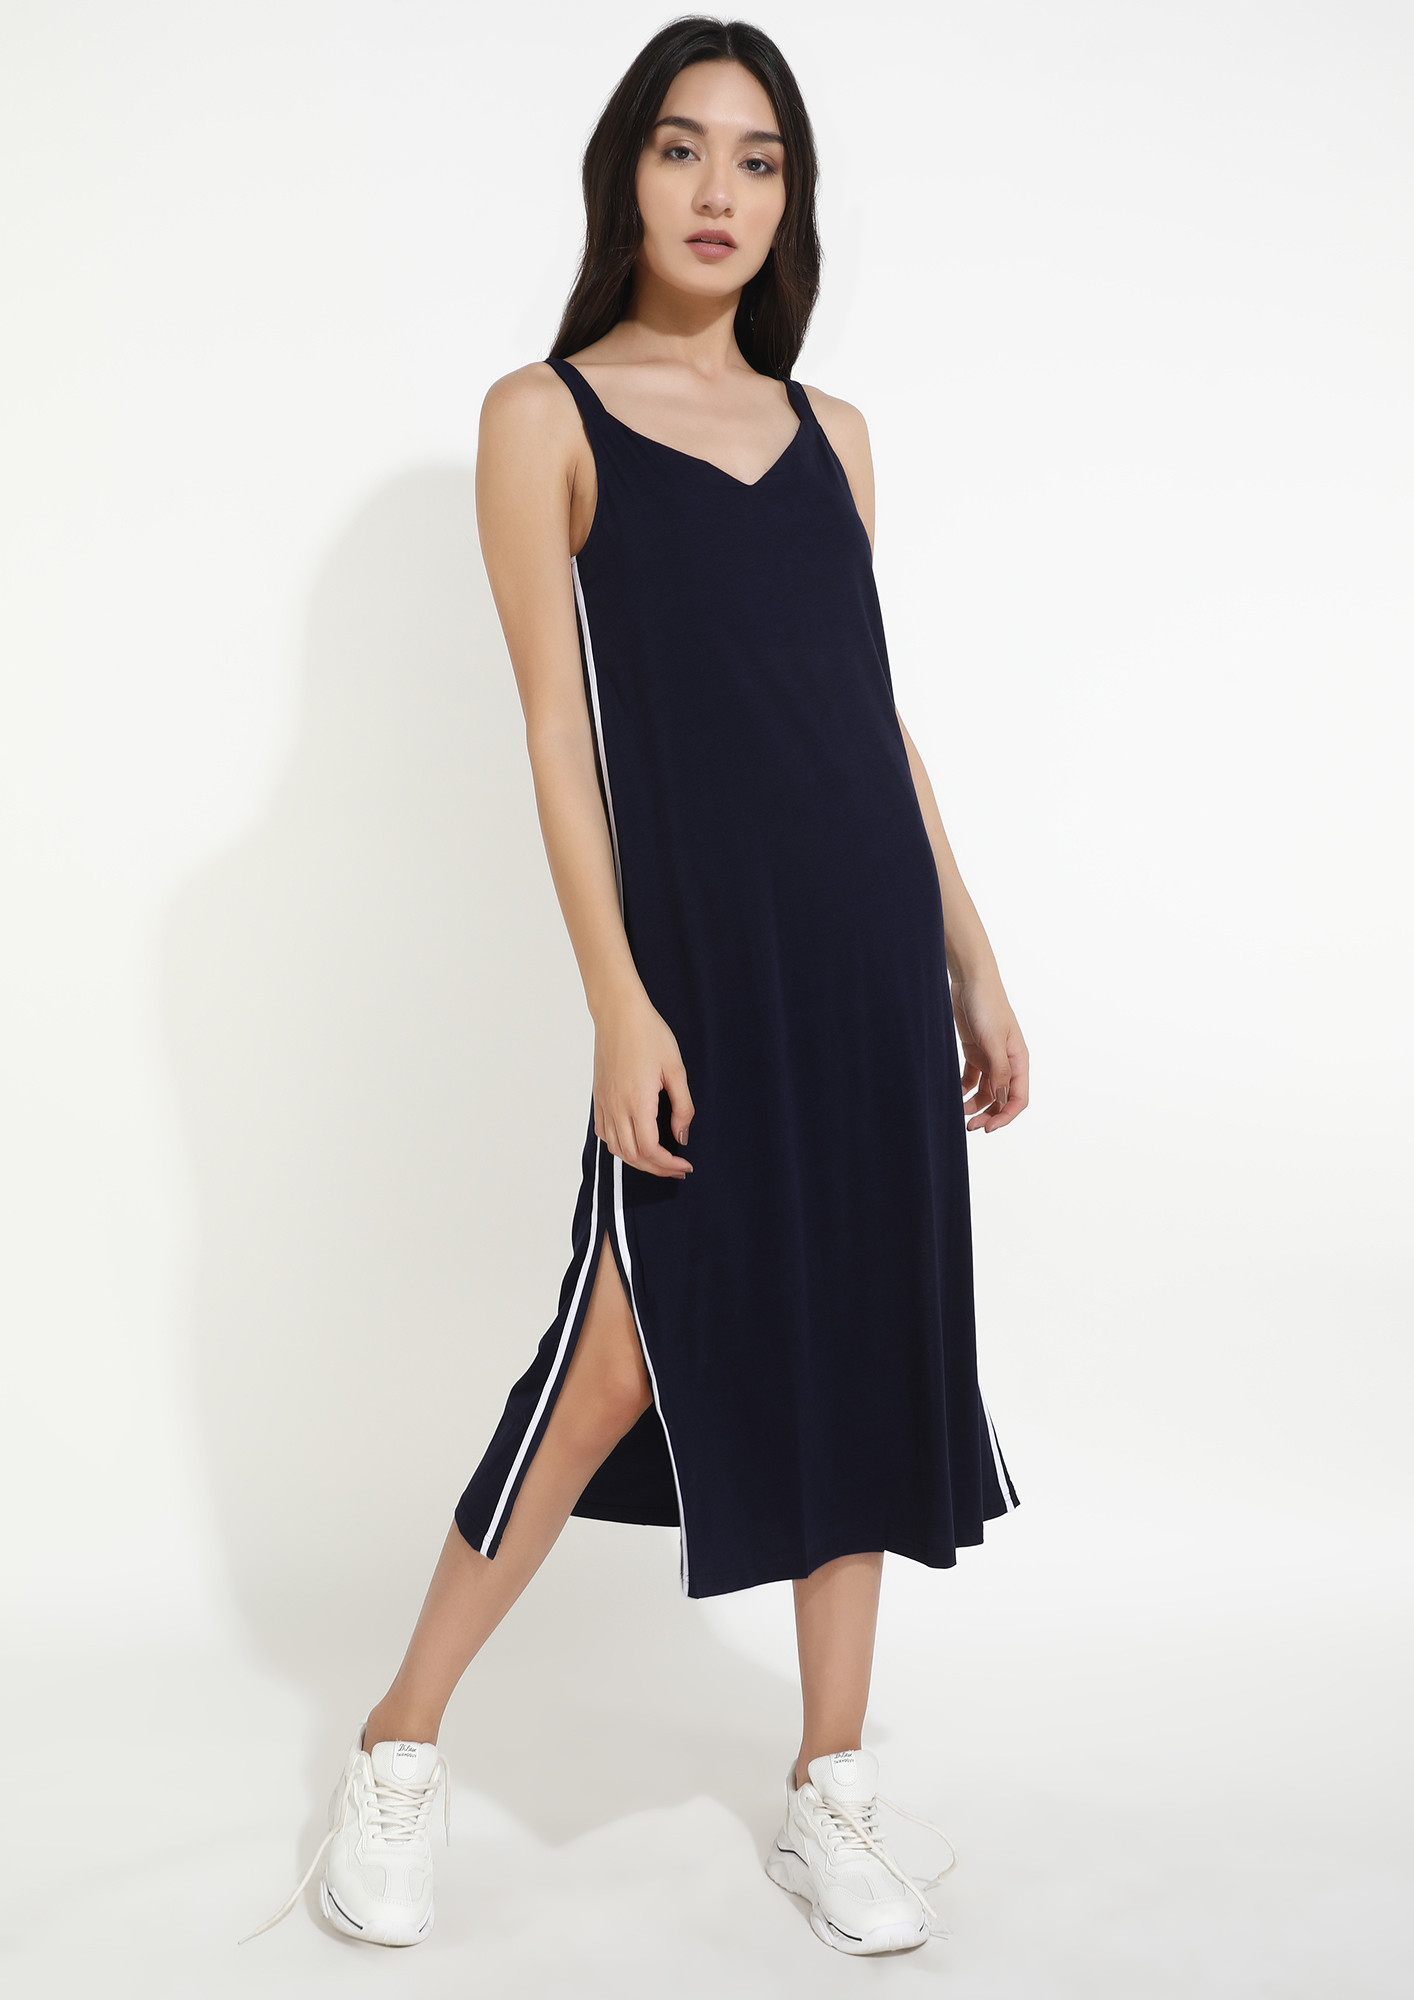 STRIPE THE OUTING AWAY NAVY DRESS